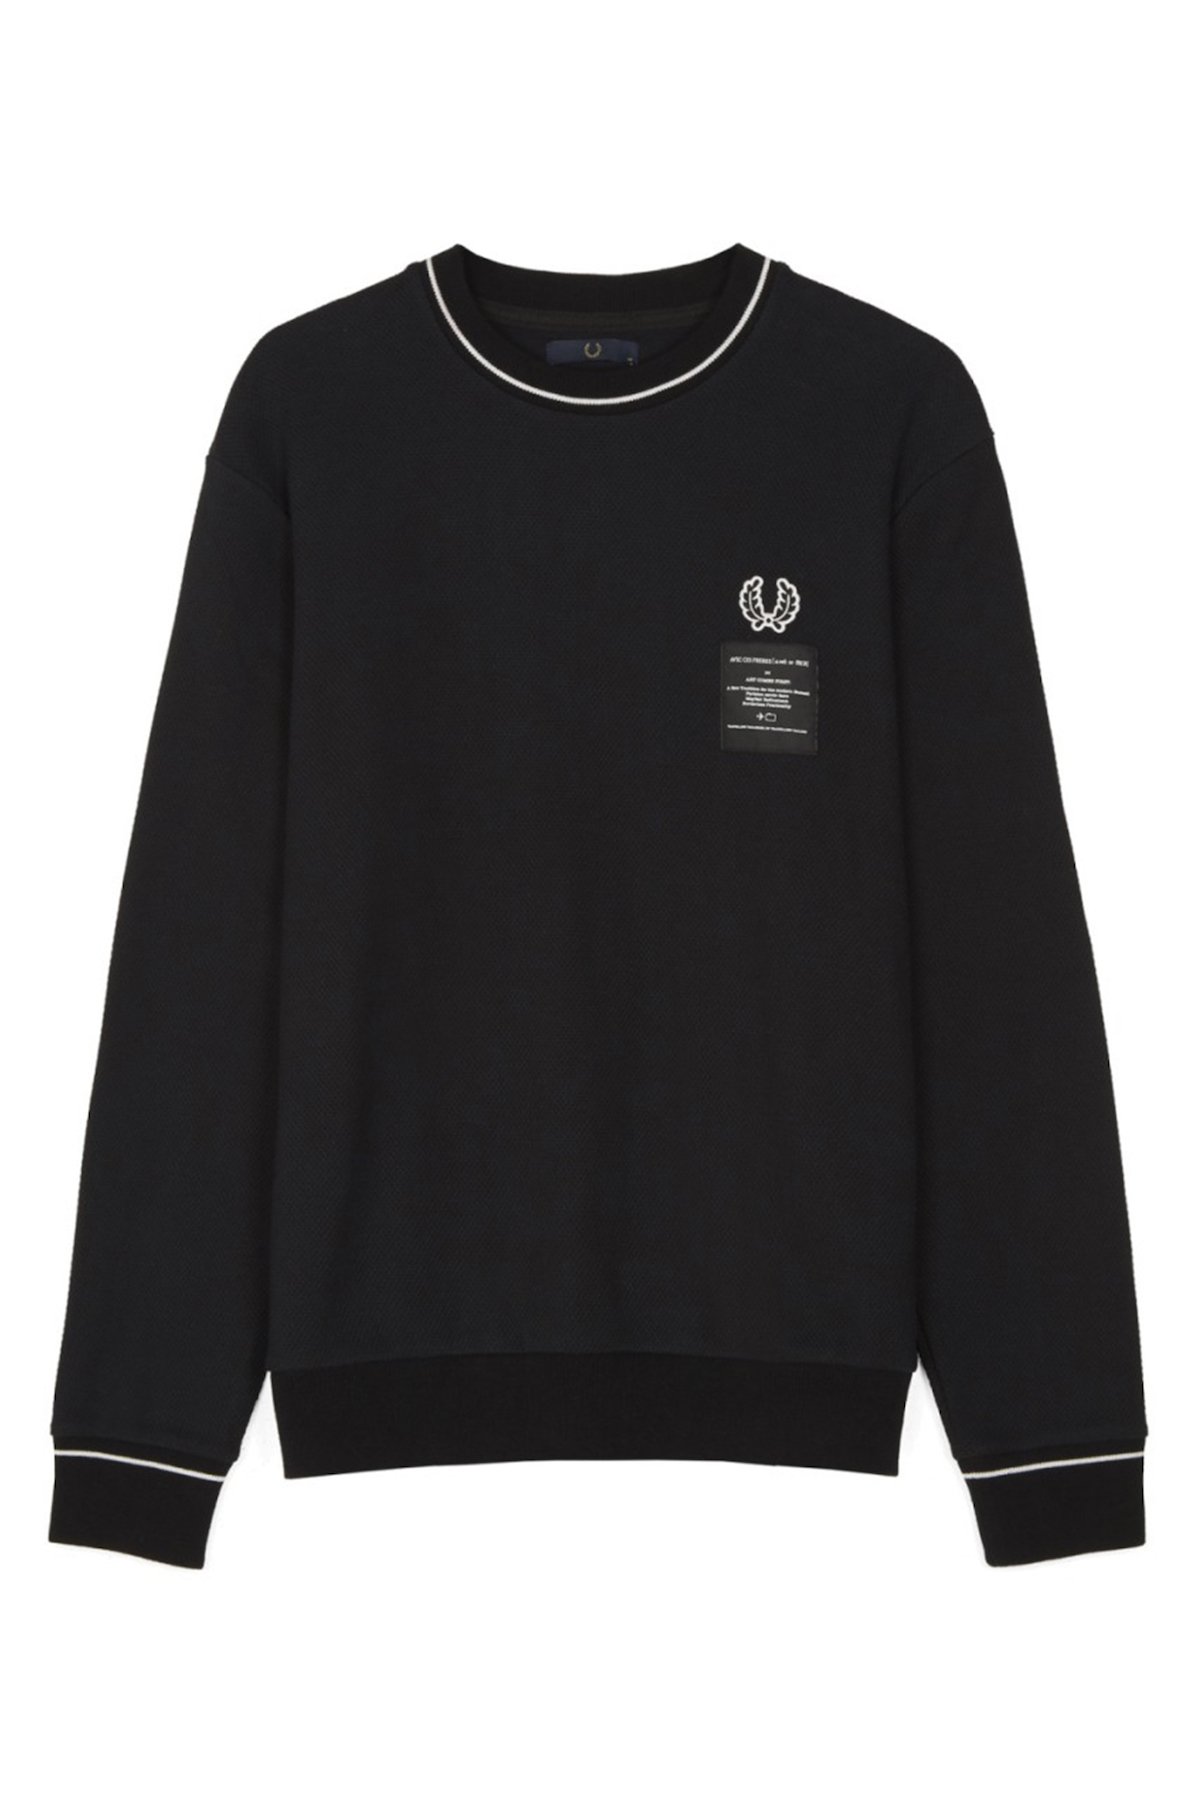 FRED PERRY X ART COMES FIRST PIQUE SWEAT